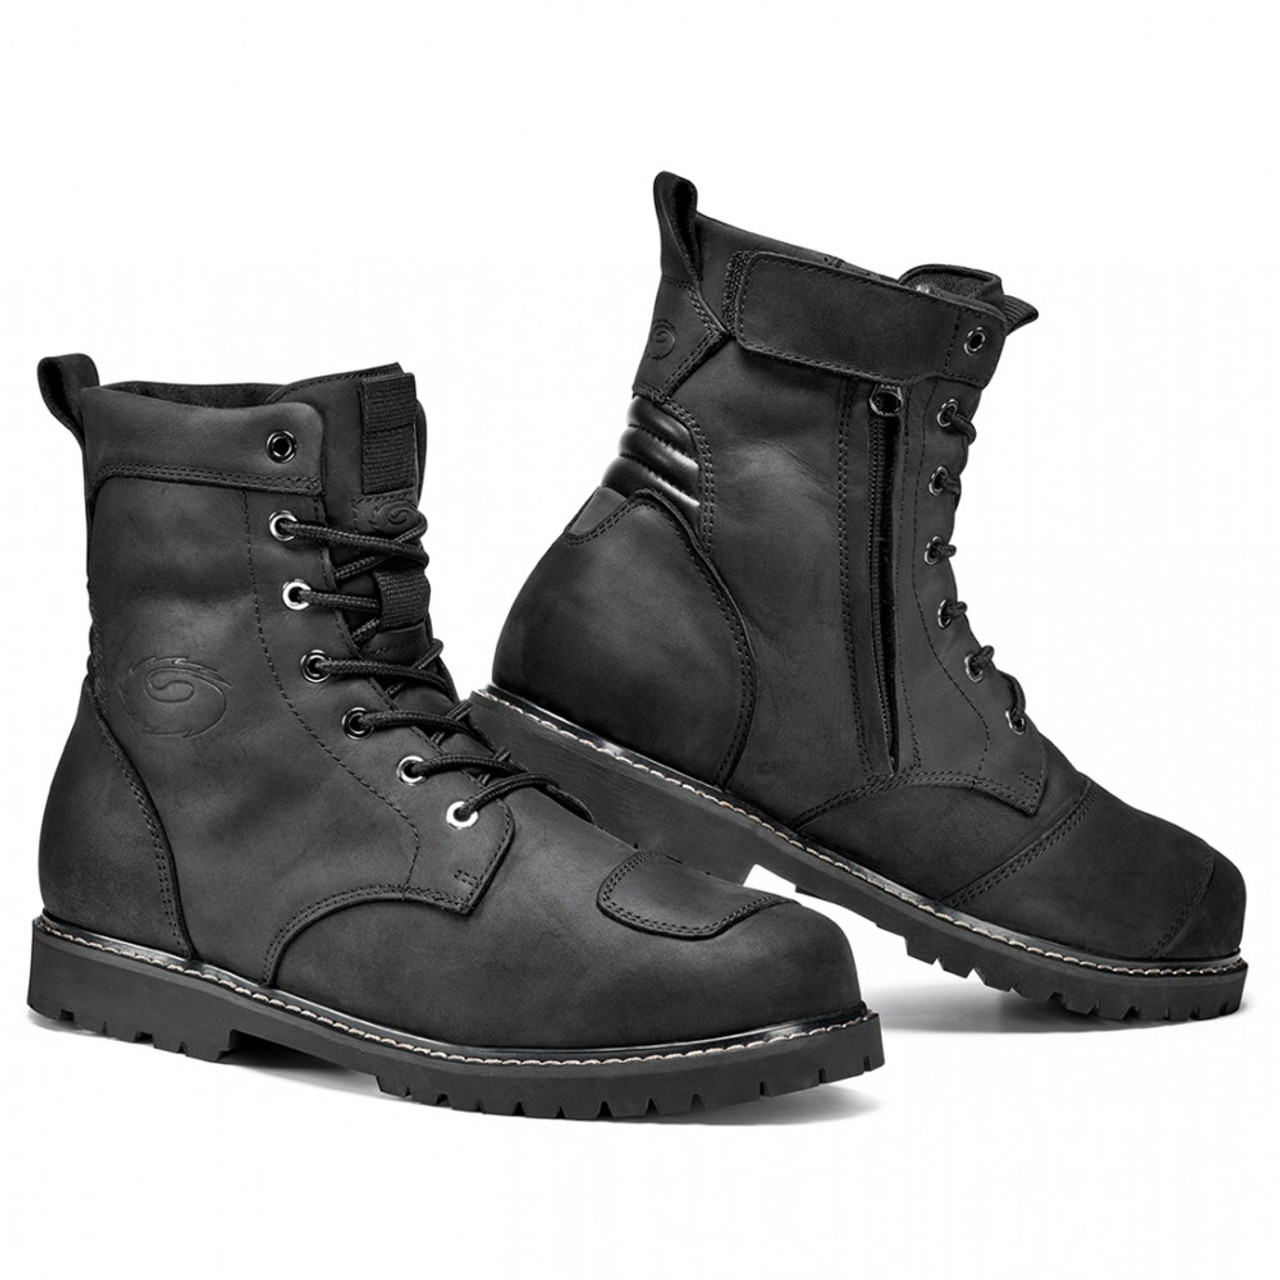 water resistant boots for work